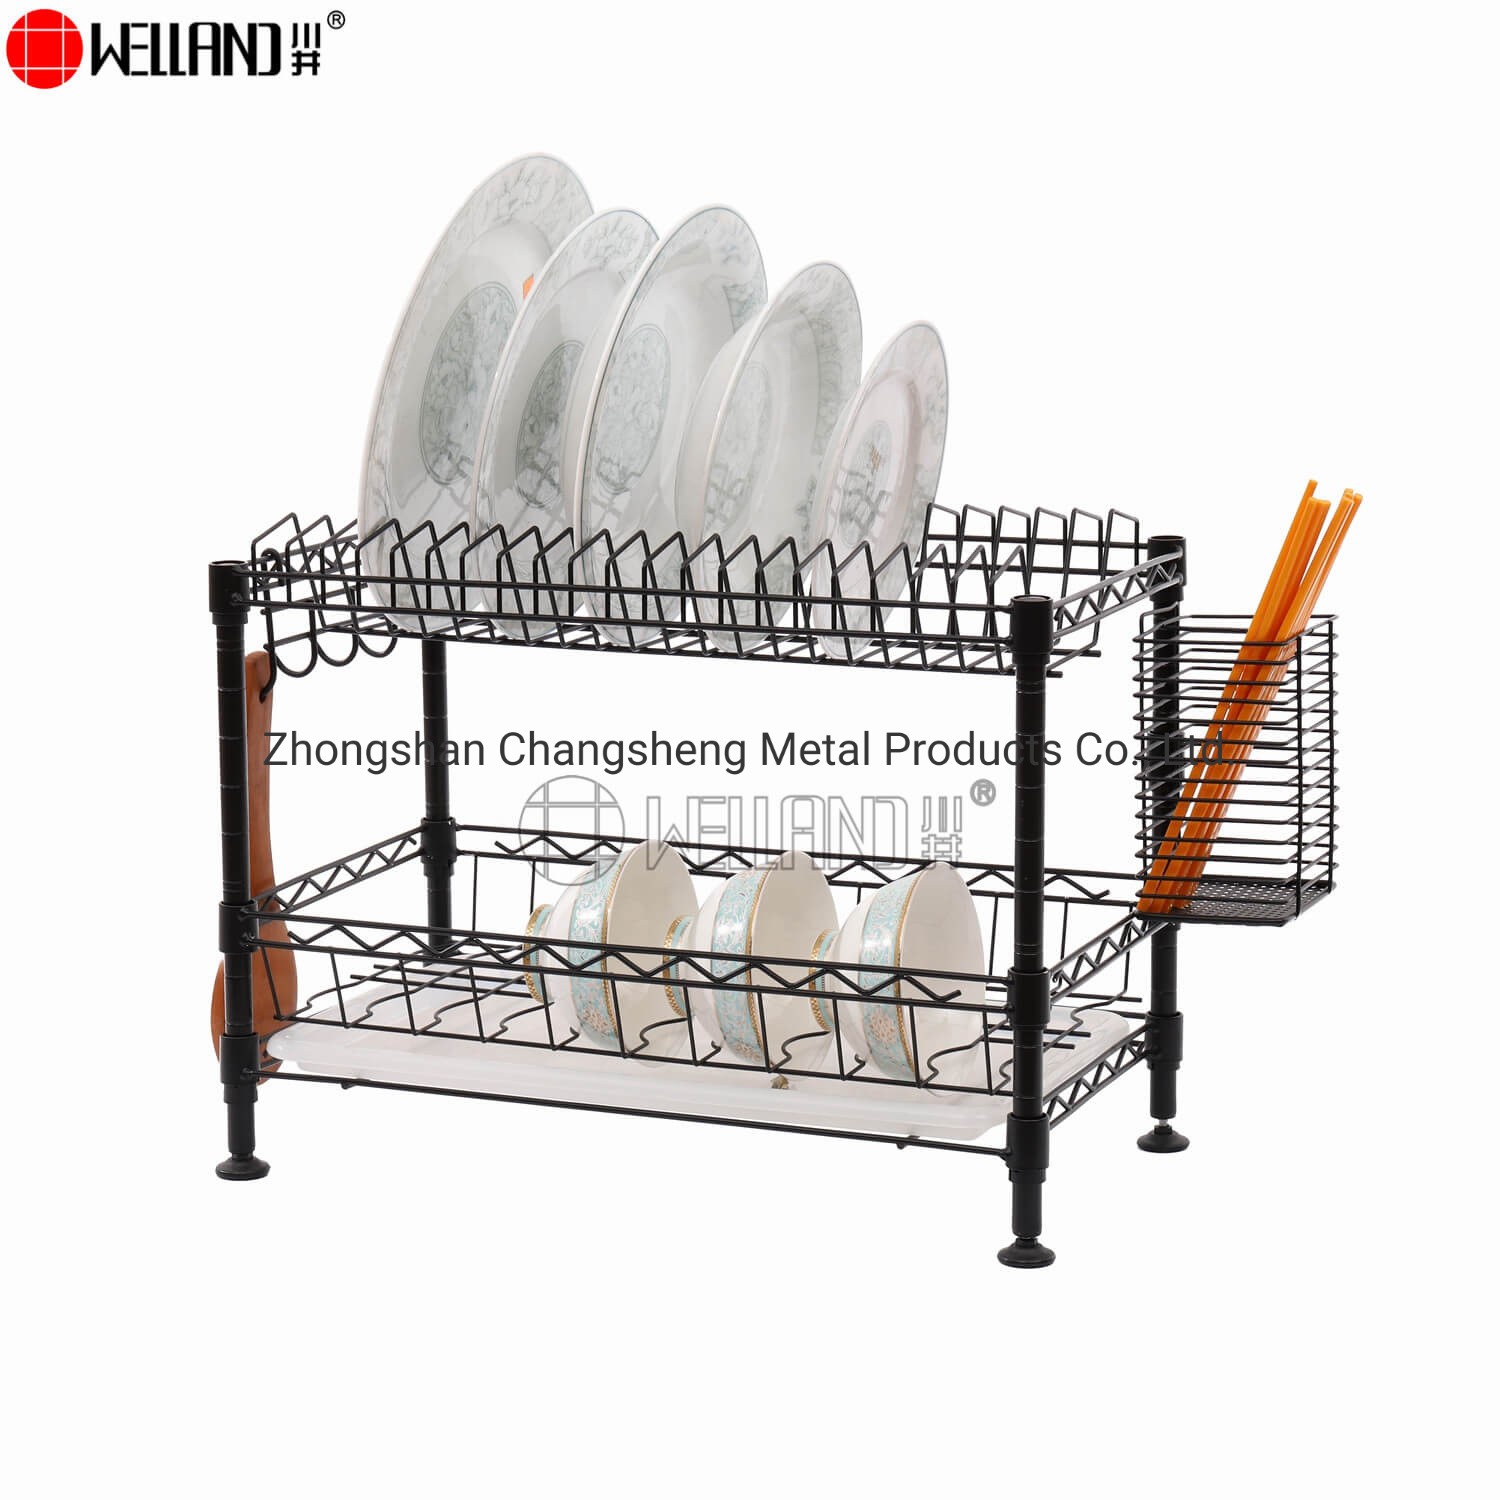 Mini Wire Basket Plate Bowl Cup Cutlery Drying Organizer Kitchen Drainer Rack Metal Dish Shelf